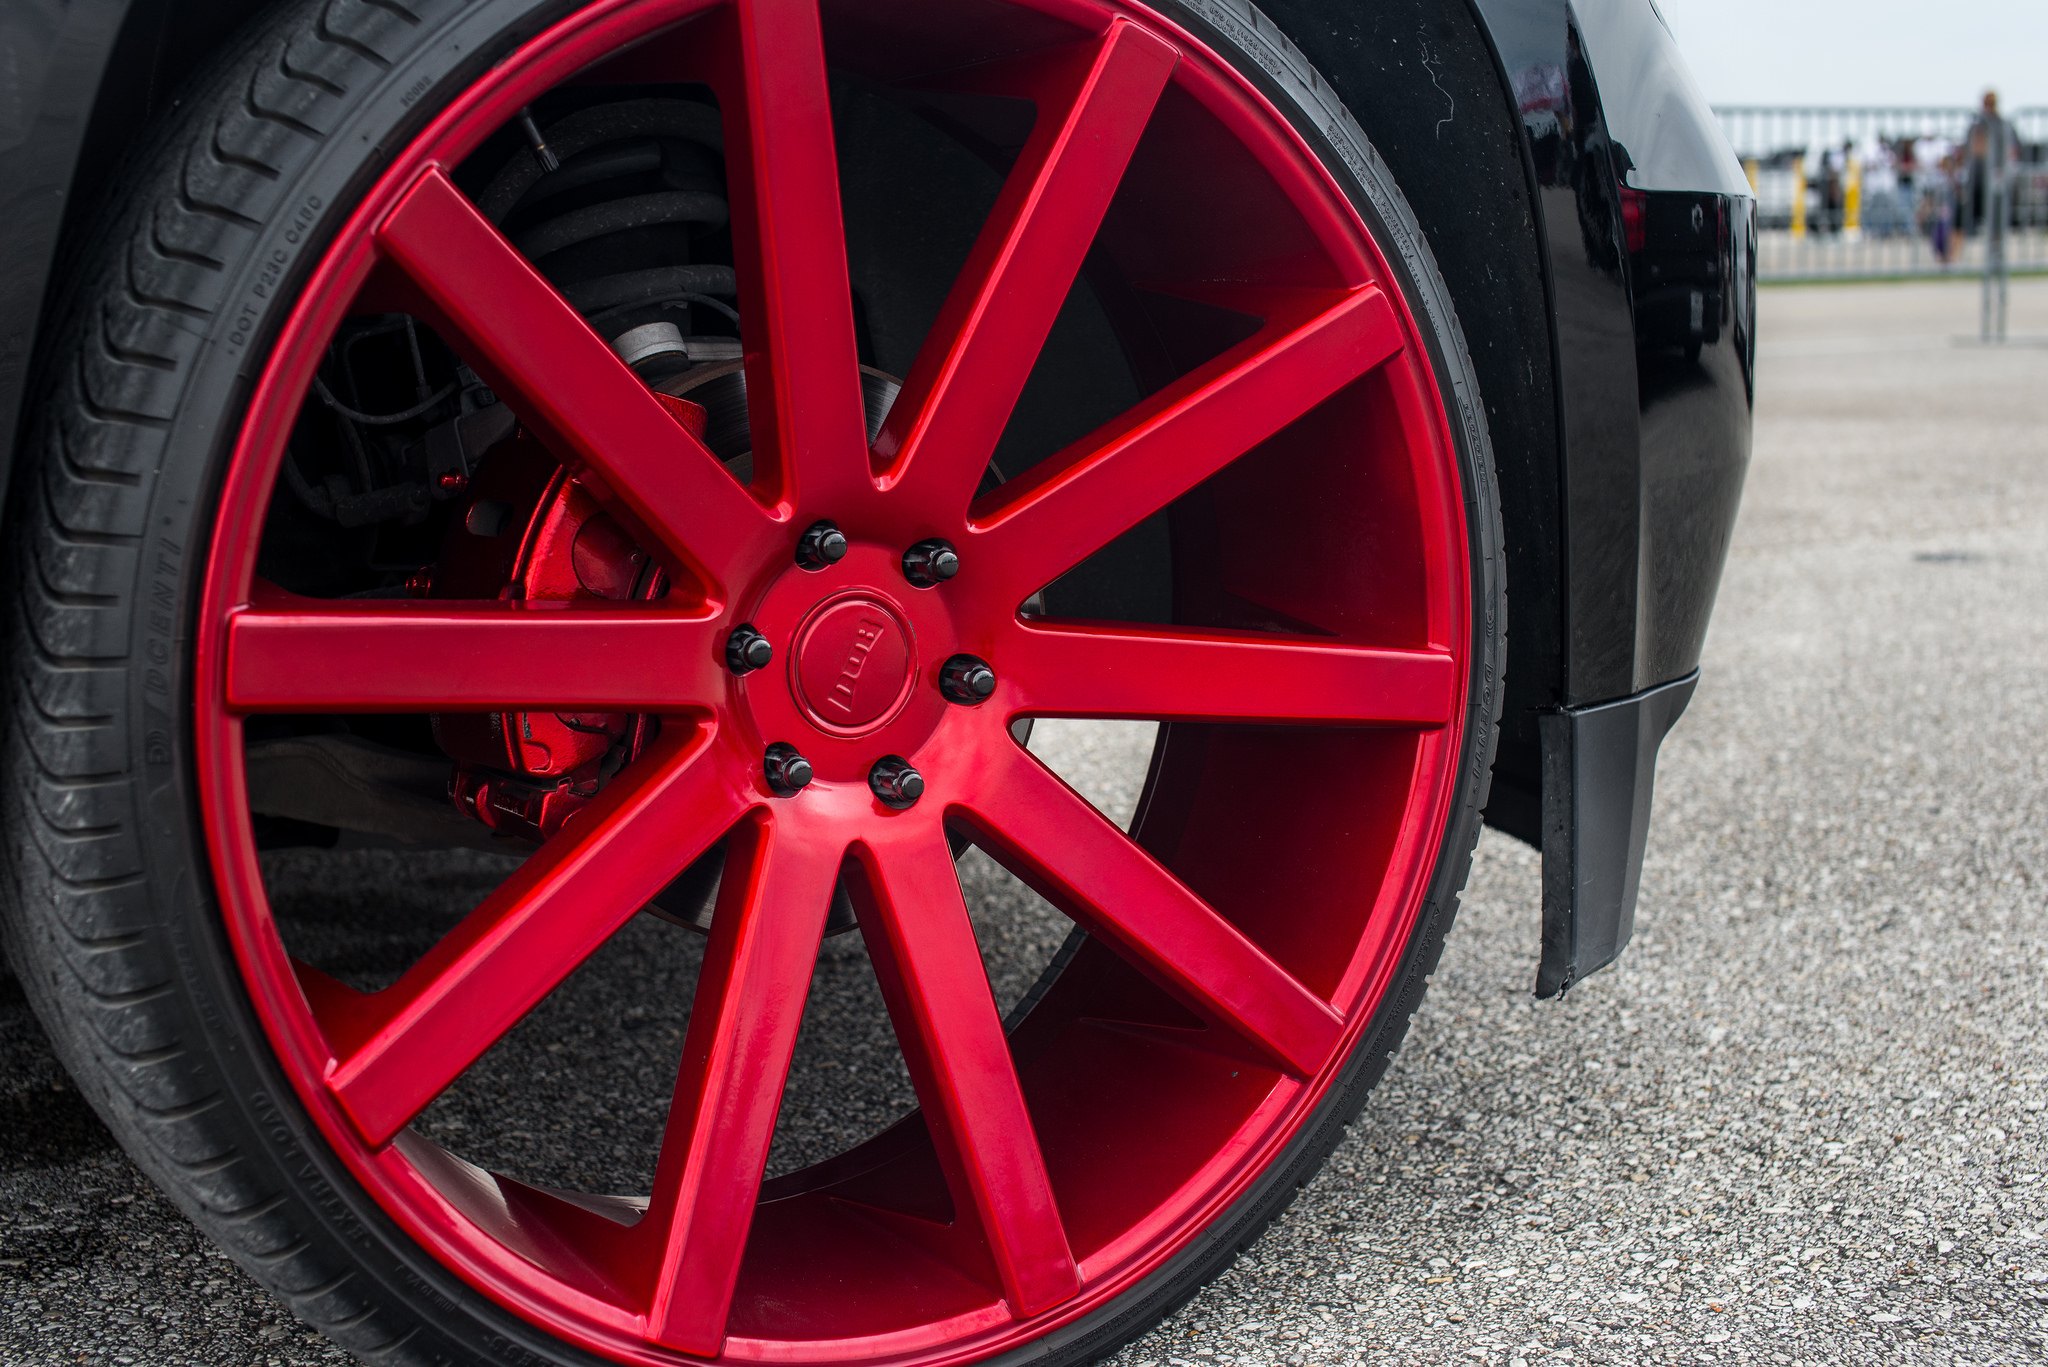 Red Forged DUB Wheels on Black Chevy Tahoe - Photo by DUB